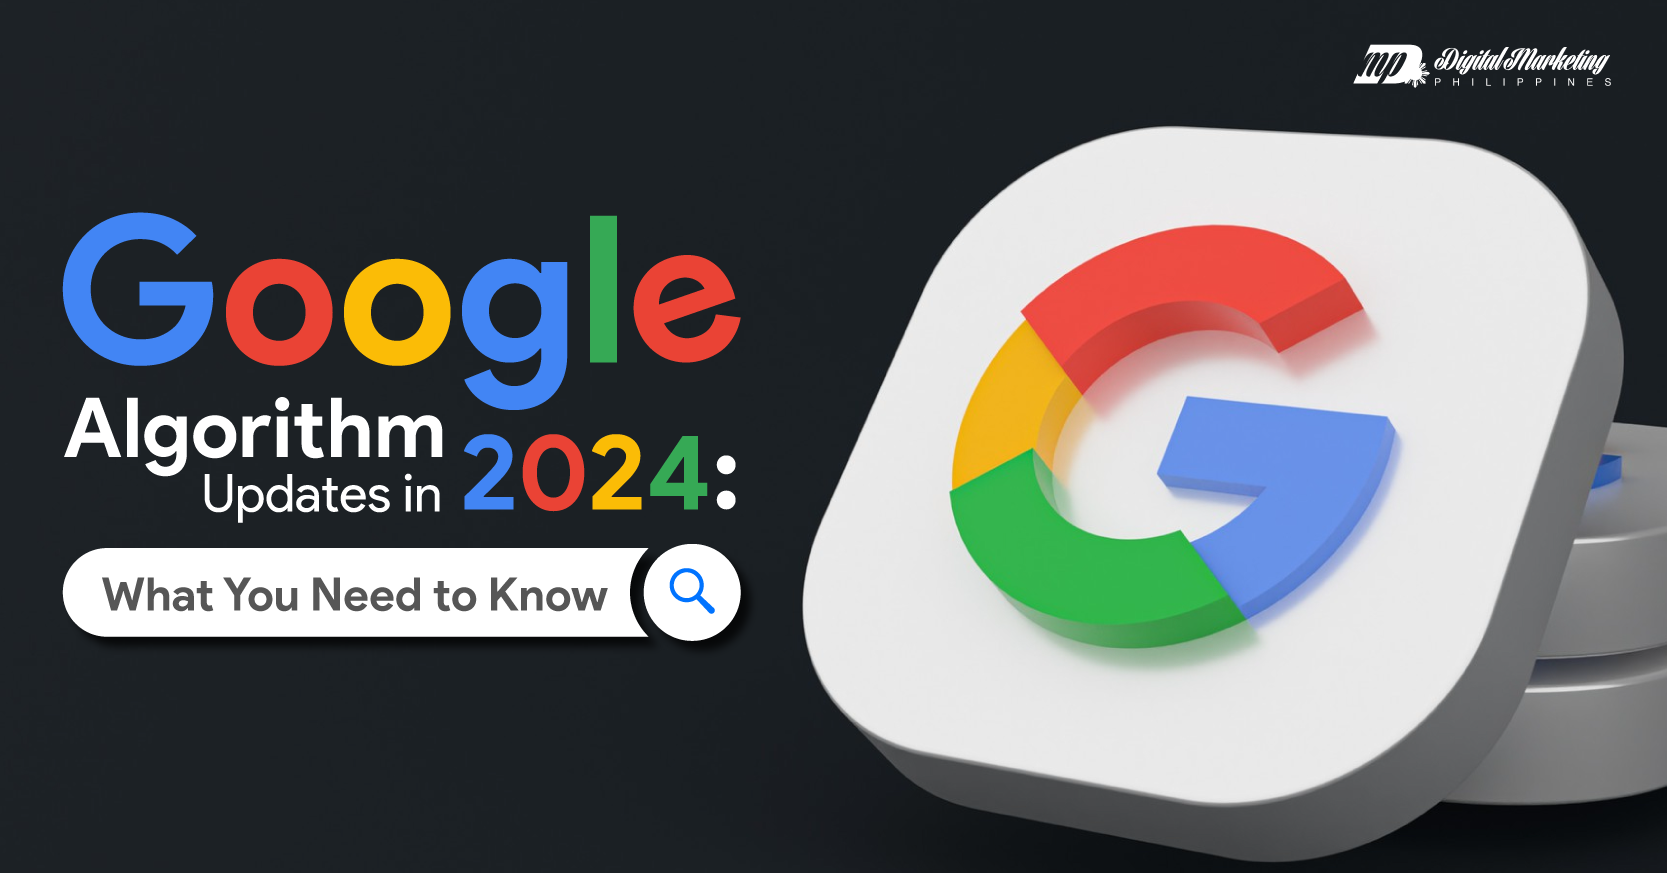 Google Algorithm Updates in 2024: What You Need to Know featured image